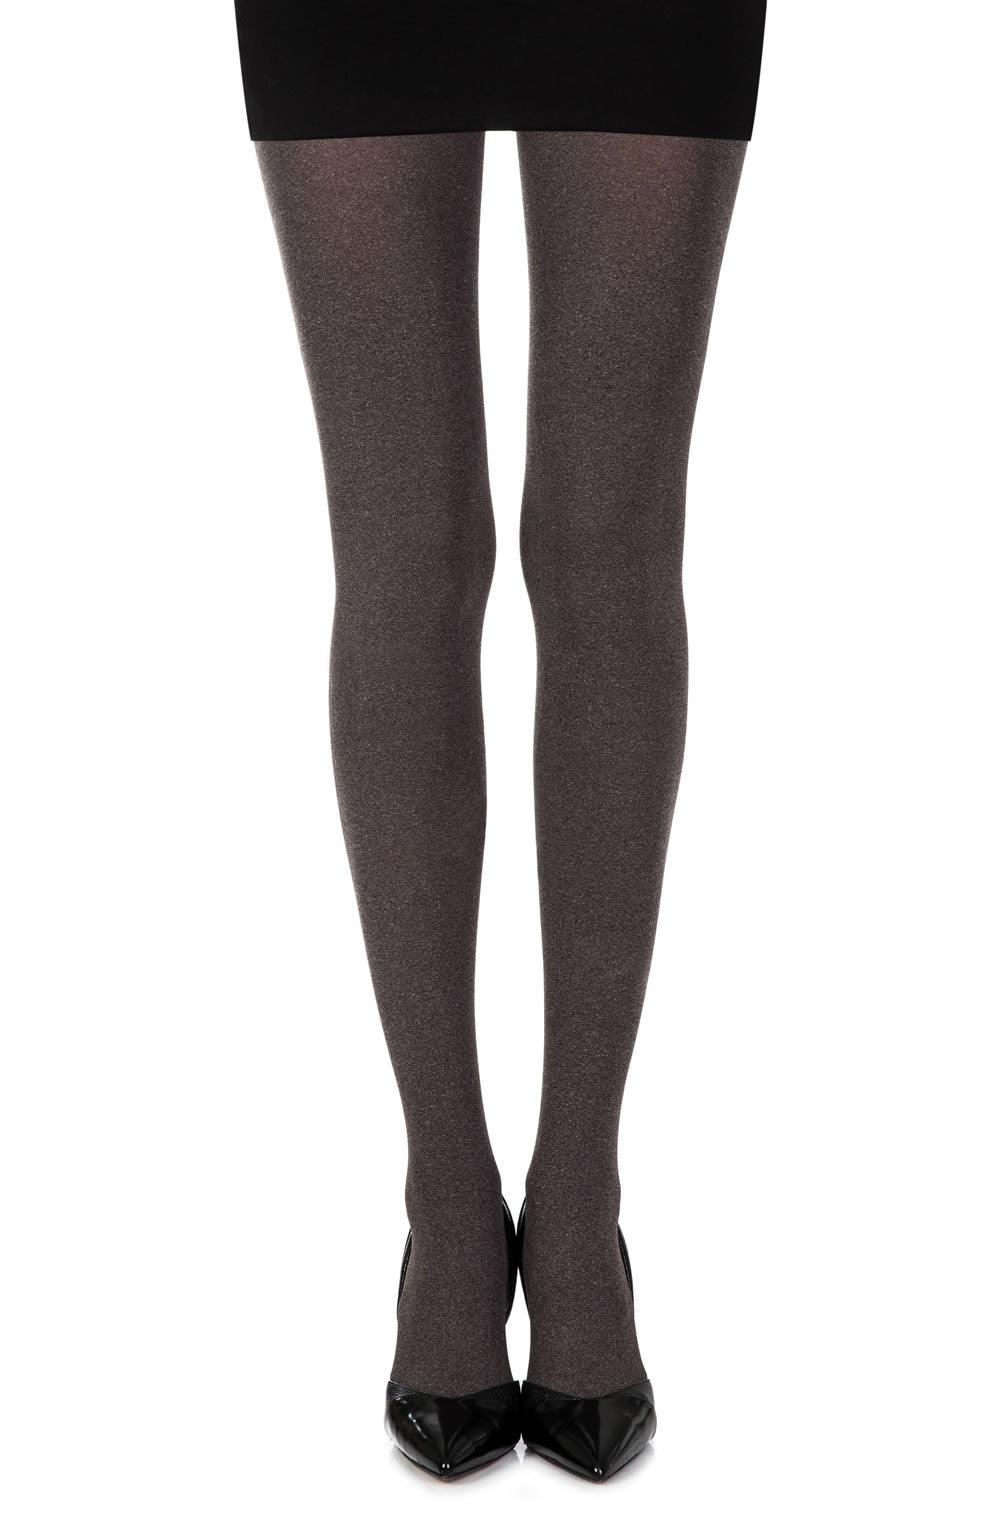 Zohara Heather Brown Opaque Tights - Sydney Rose Lingerie 